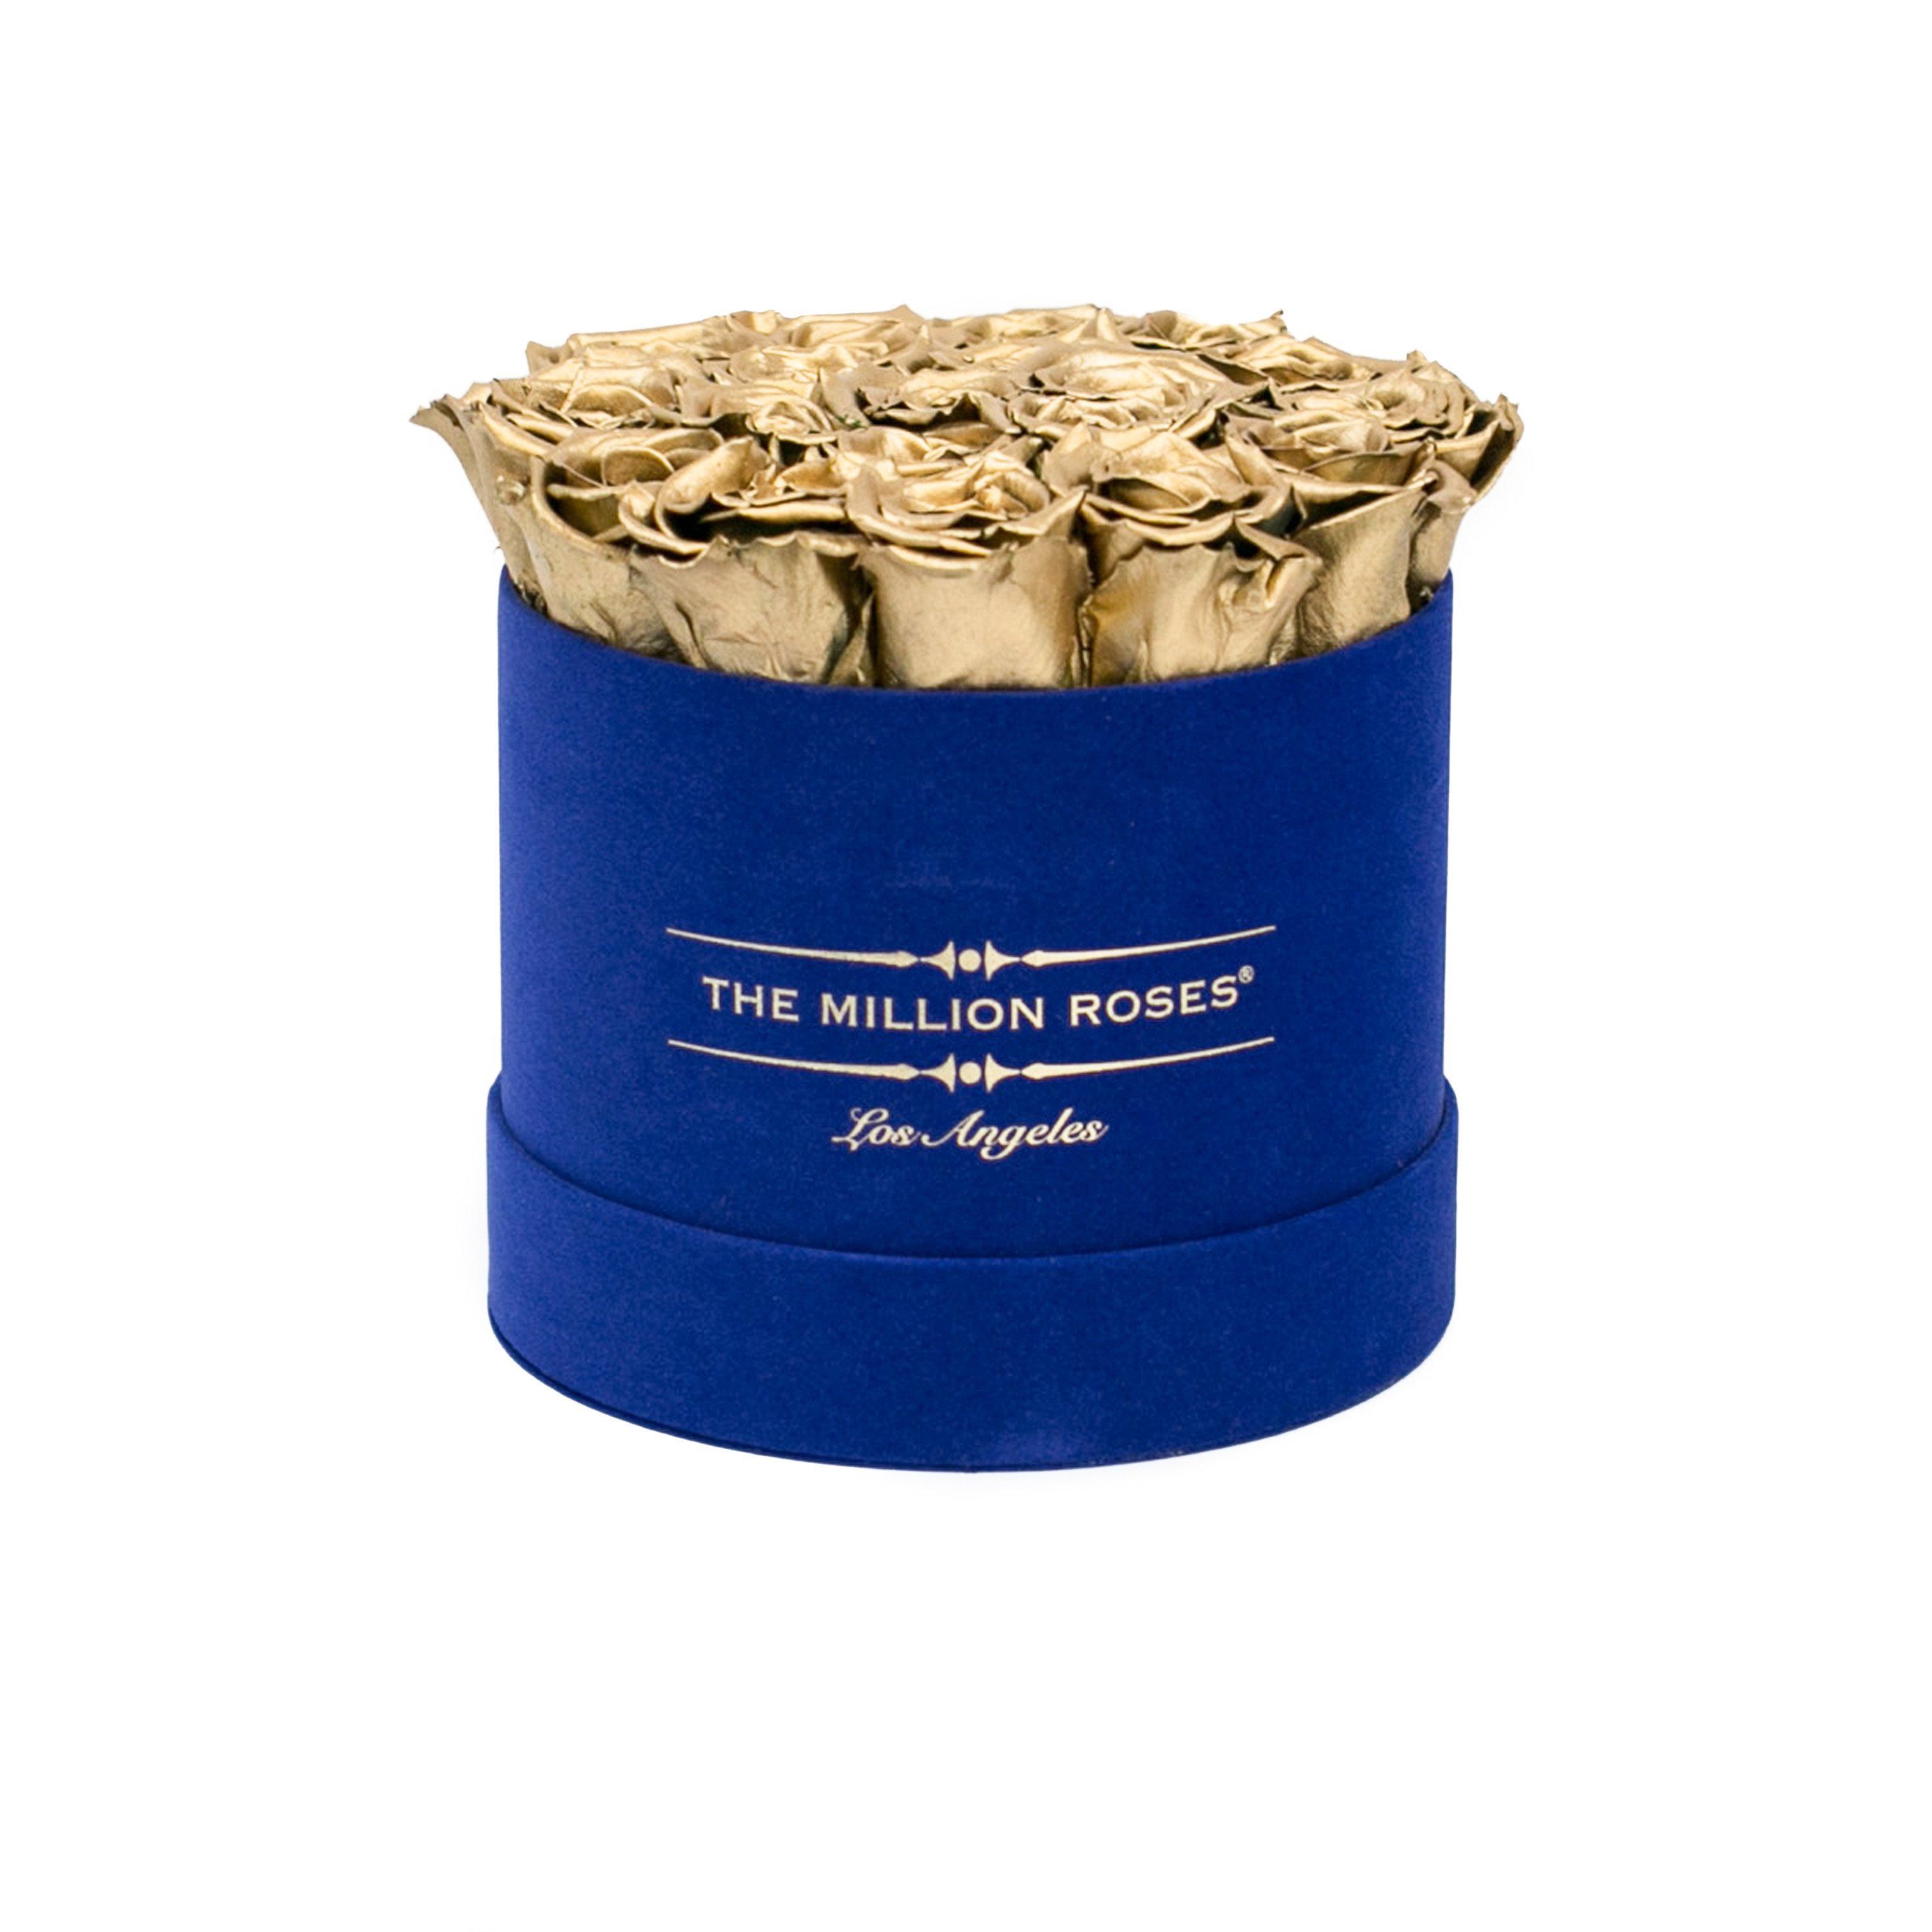 classic round box - royal-blue suede box gold eternity roses - the million roses